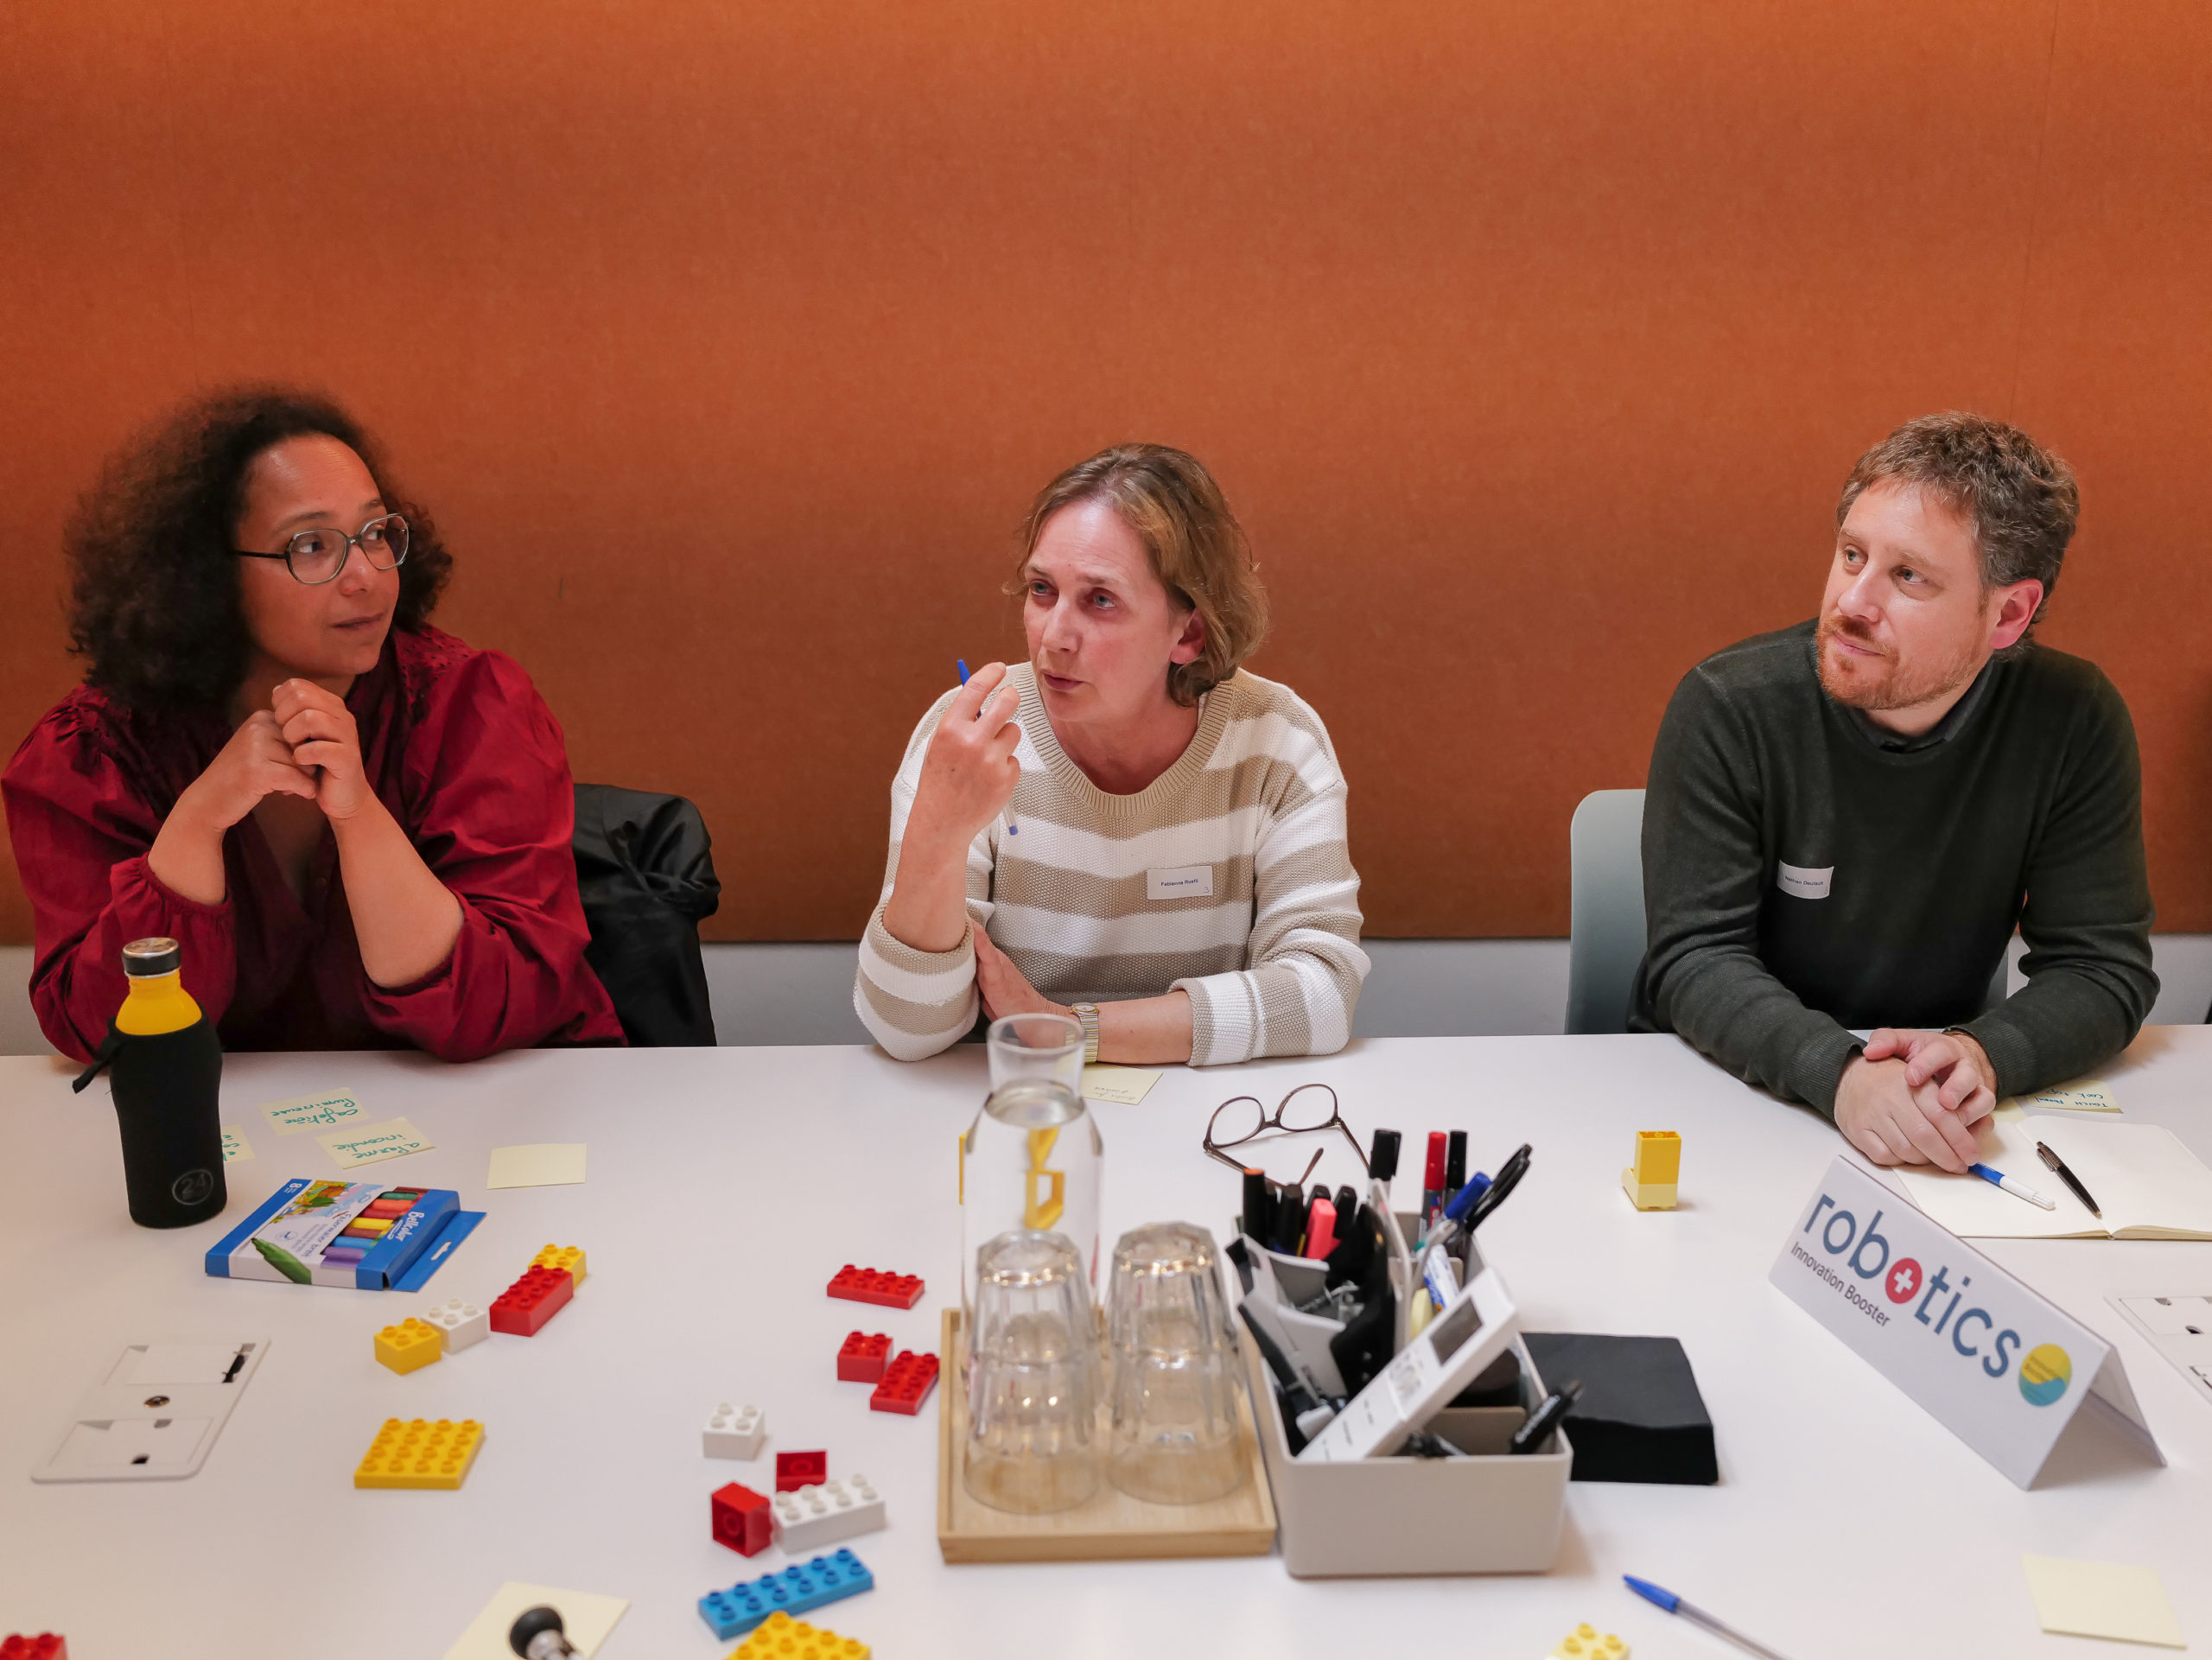 Two participants listen to a third participant who takes part in the ideation workshop.